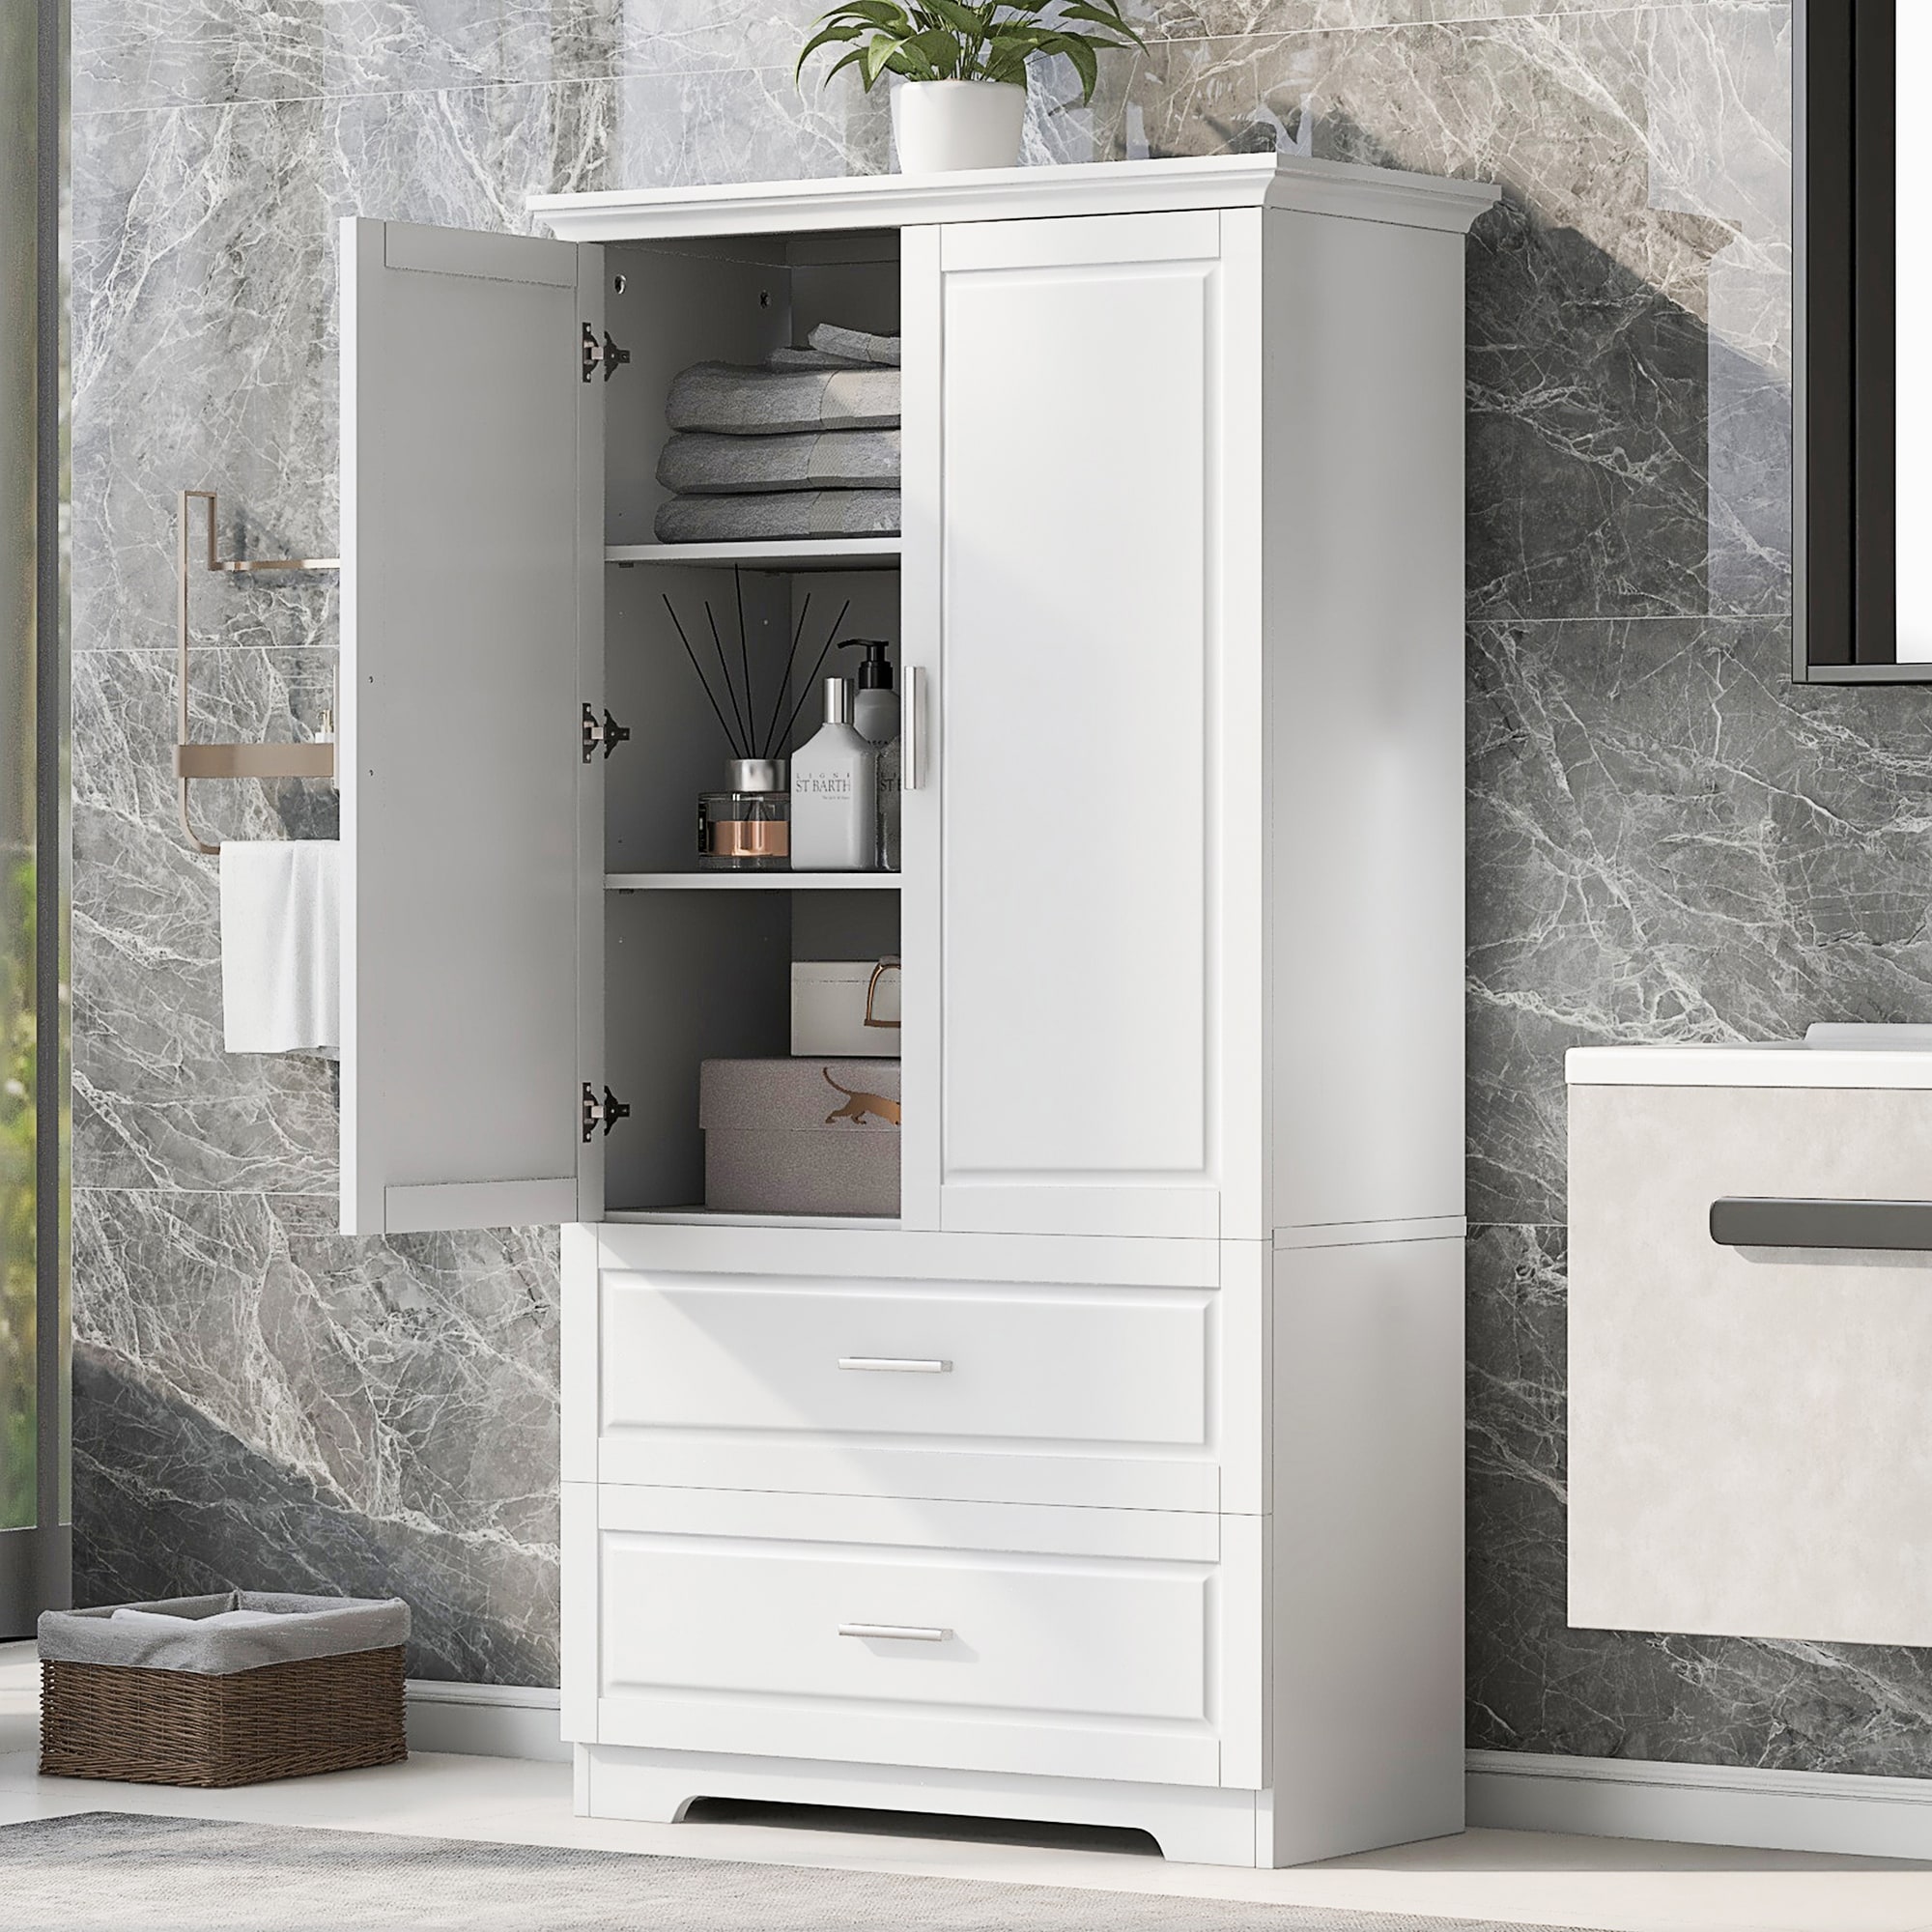 https://ak1.ostkcdn.com/images/products/is/images/direct/04ca4ce5d98e30f820ec366746511a9c6d6ecf8e/Freestanding-Tall-Storage-Cabinet-with-2-Doors%2C-2-Drawers%2C-and-Adjustable-Shelf%2C-Home-Office-Cabinet-Bedside-Table-Plant-Stand.jpg